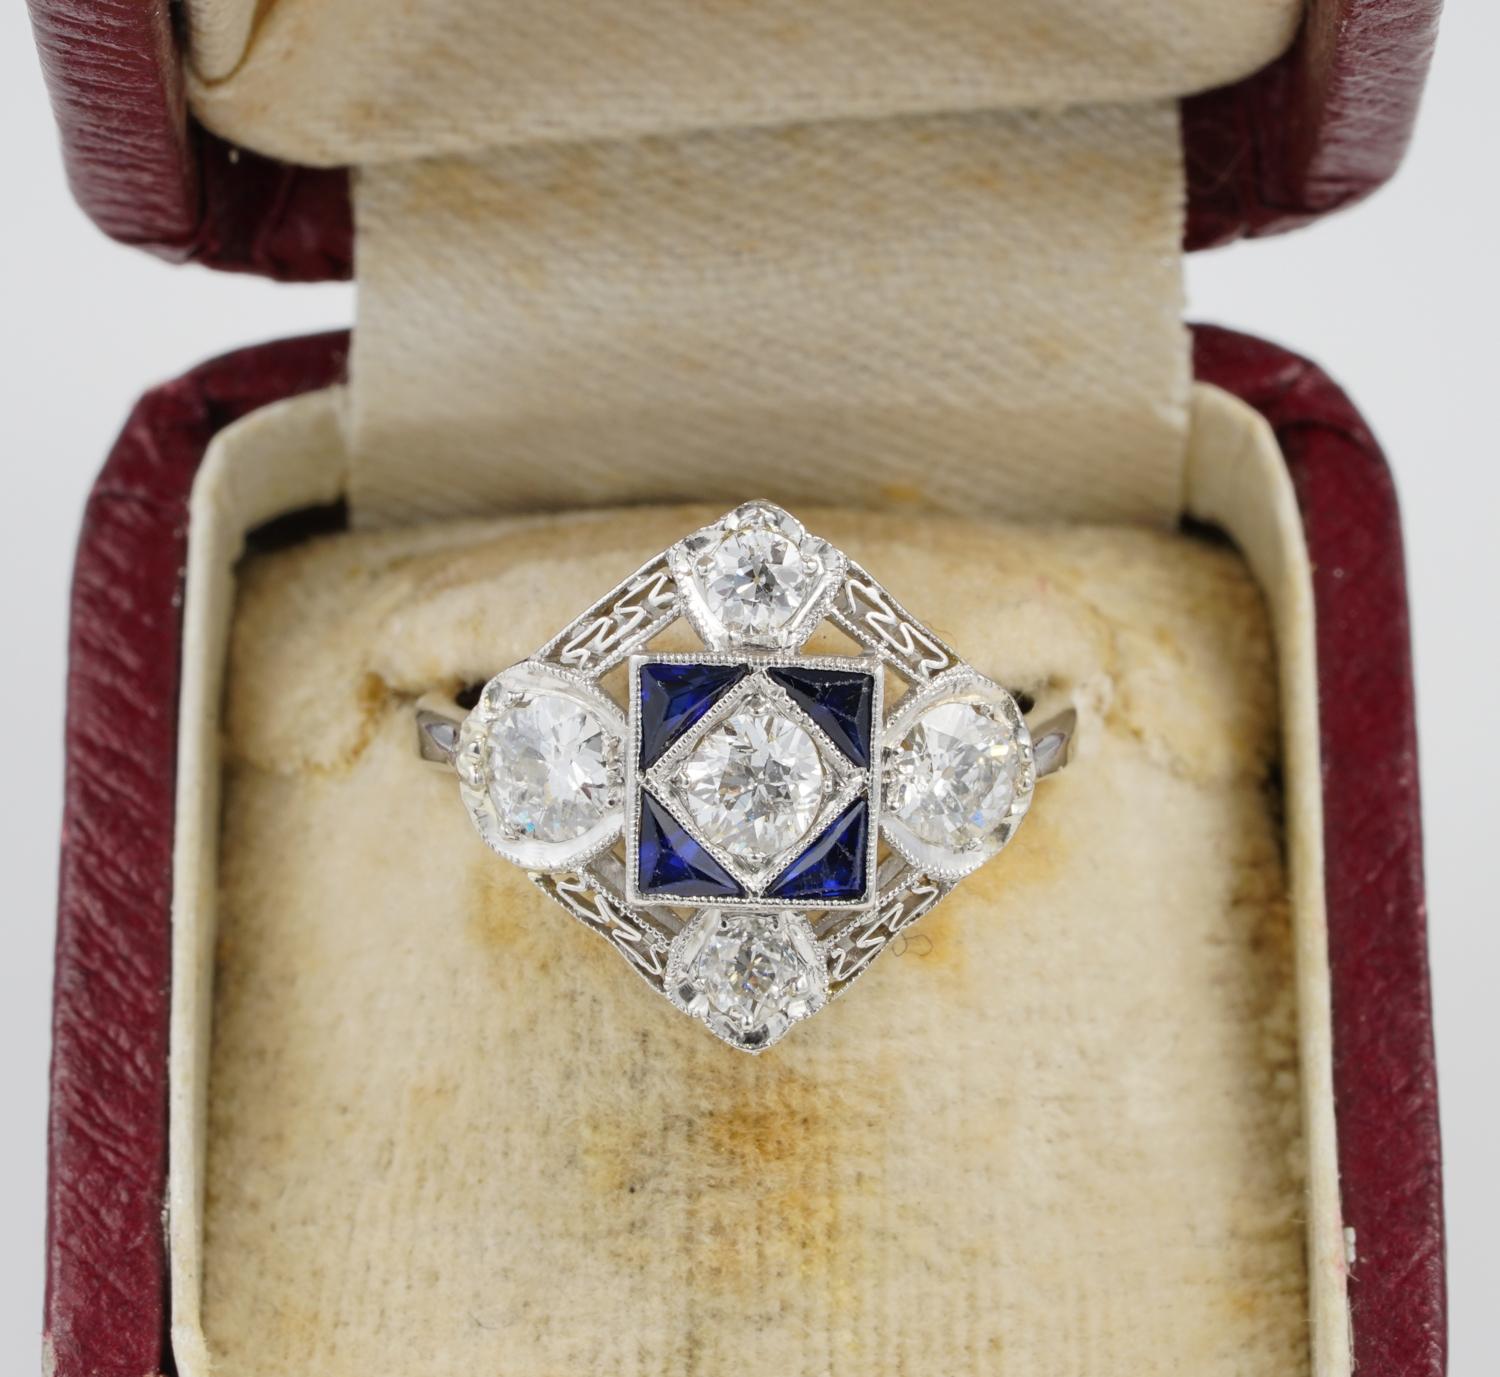 Superb example of Edwardian period Diamond and Sapphire ring
Individually hand crafted as unique piece of solid Platinum
Highest standard of workmanship and design related to the period known as the most elegant ever
The charming geometric crown is